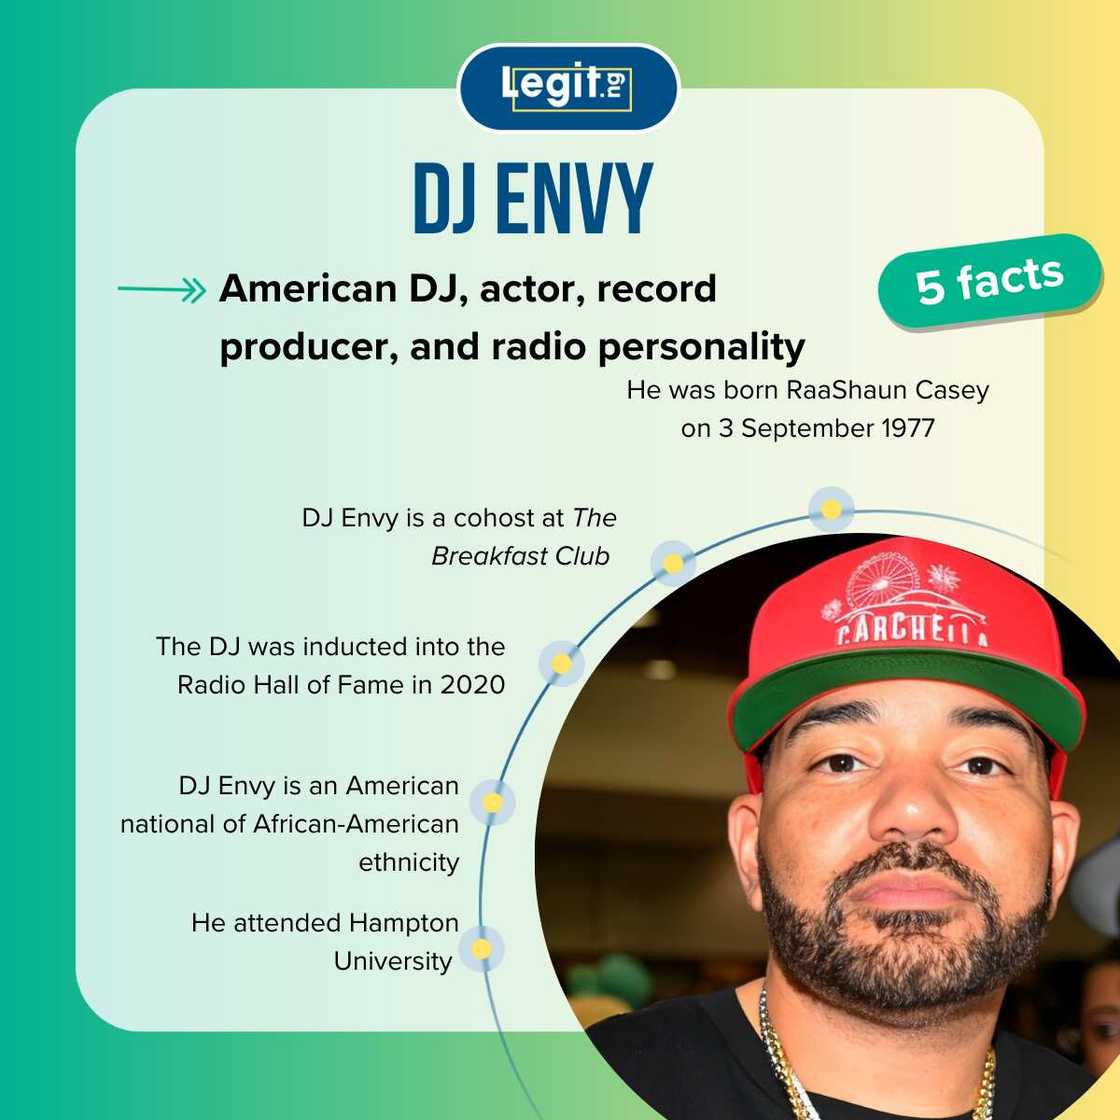 Quick facts about DJ Envy